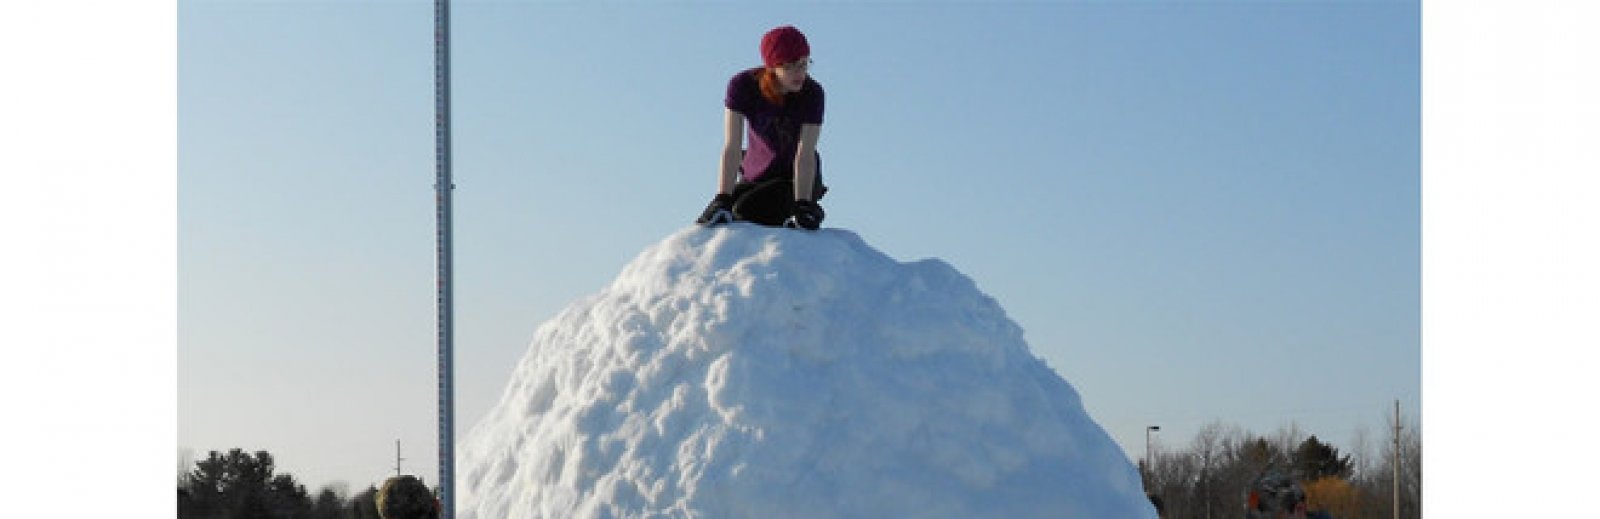 Michigan Tech may have set world record for snowmen built in an hour